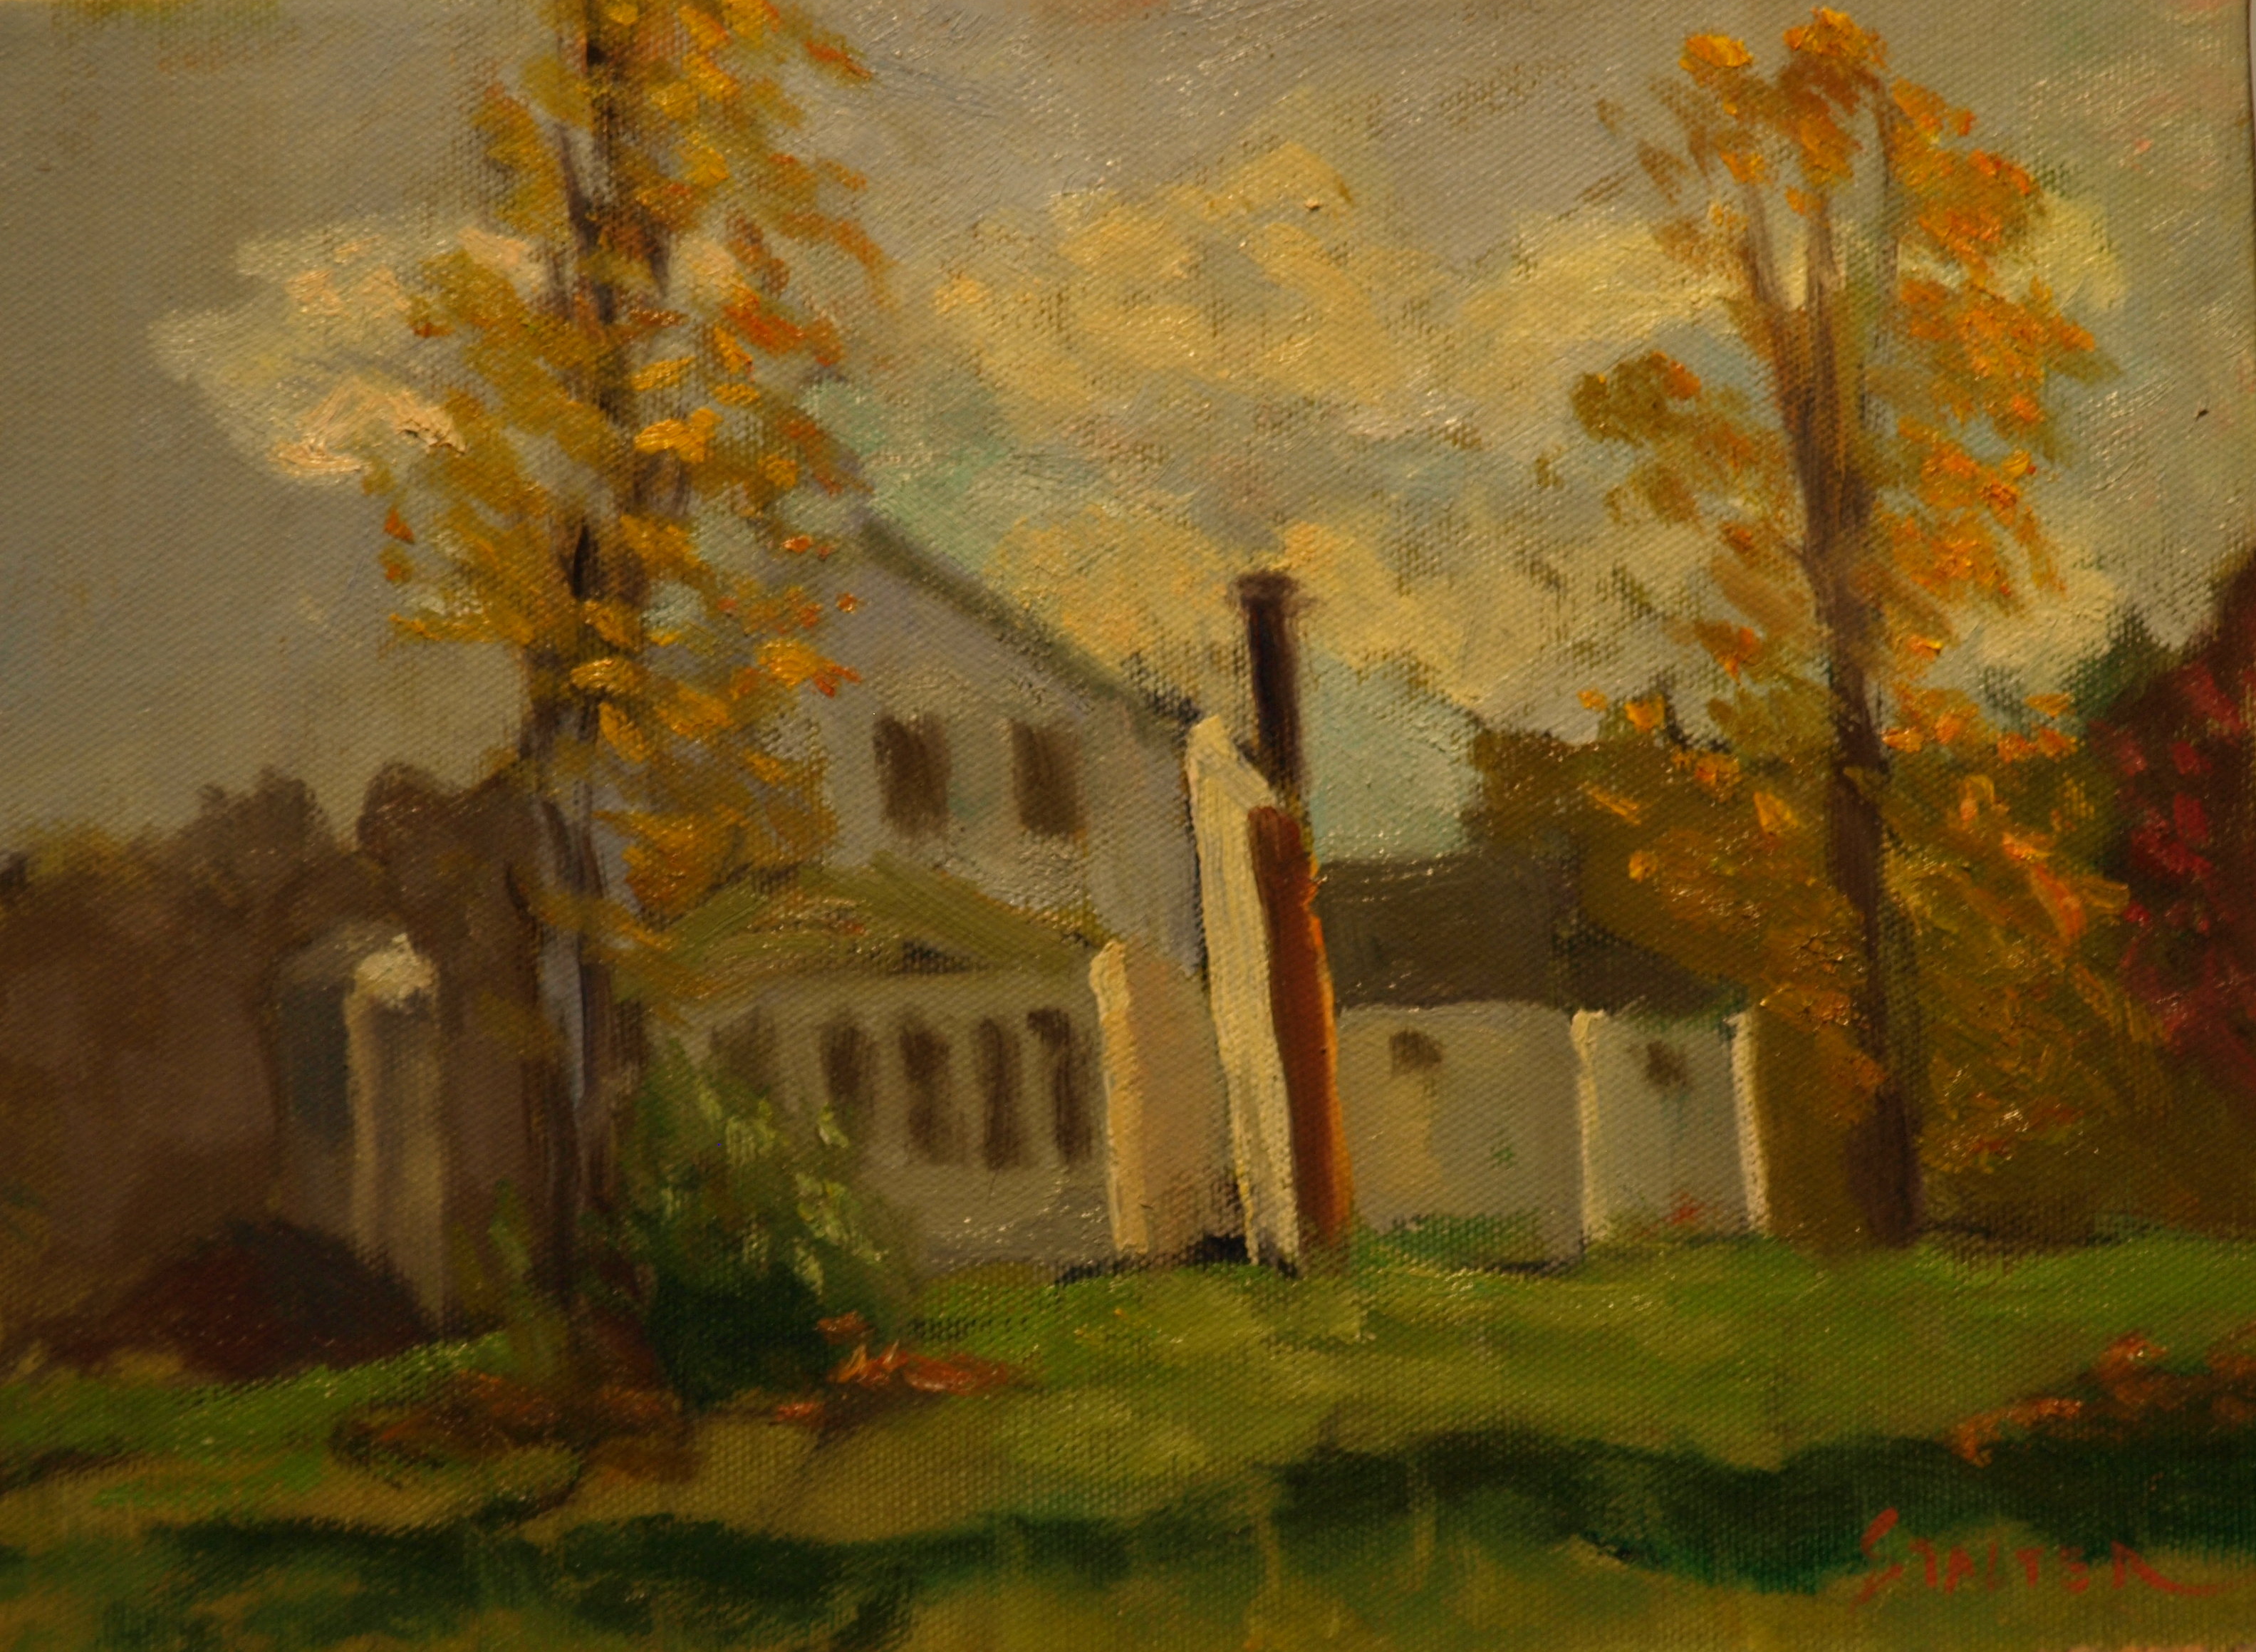 Lindburgh Home in Autumn, Oil on Canvas, 9 x 12 Inches, by Richard Stalter, $225